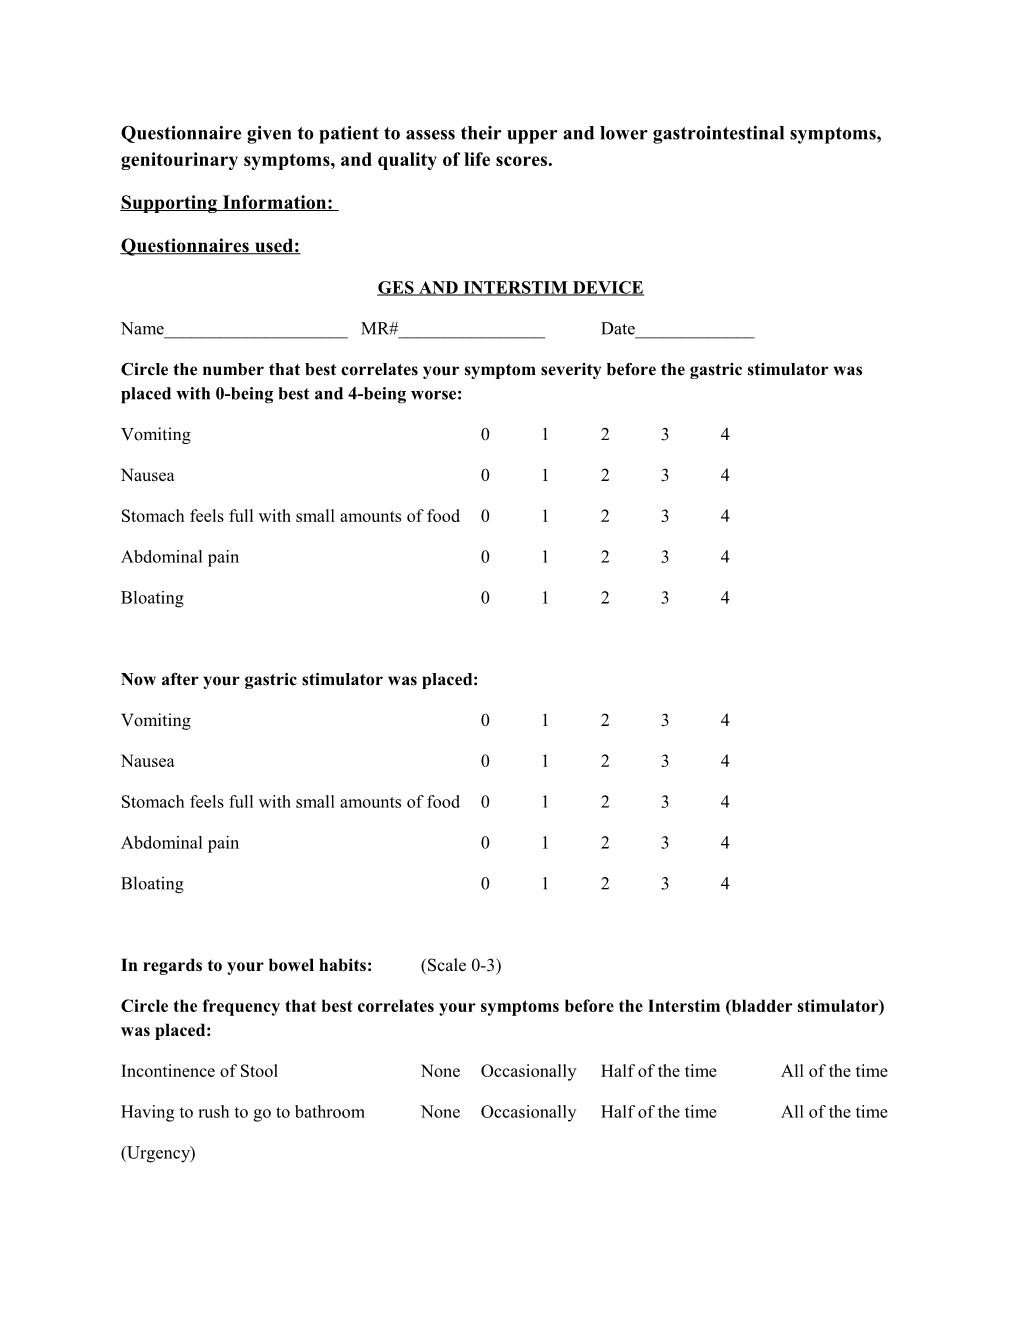 Questionnaire Given to Patient to Assess Their Upper and Lower Gastrointestinal Symptoms